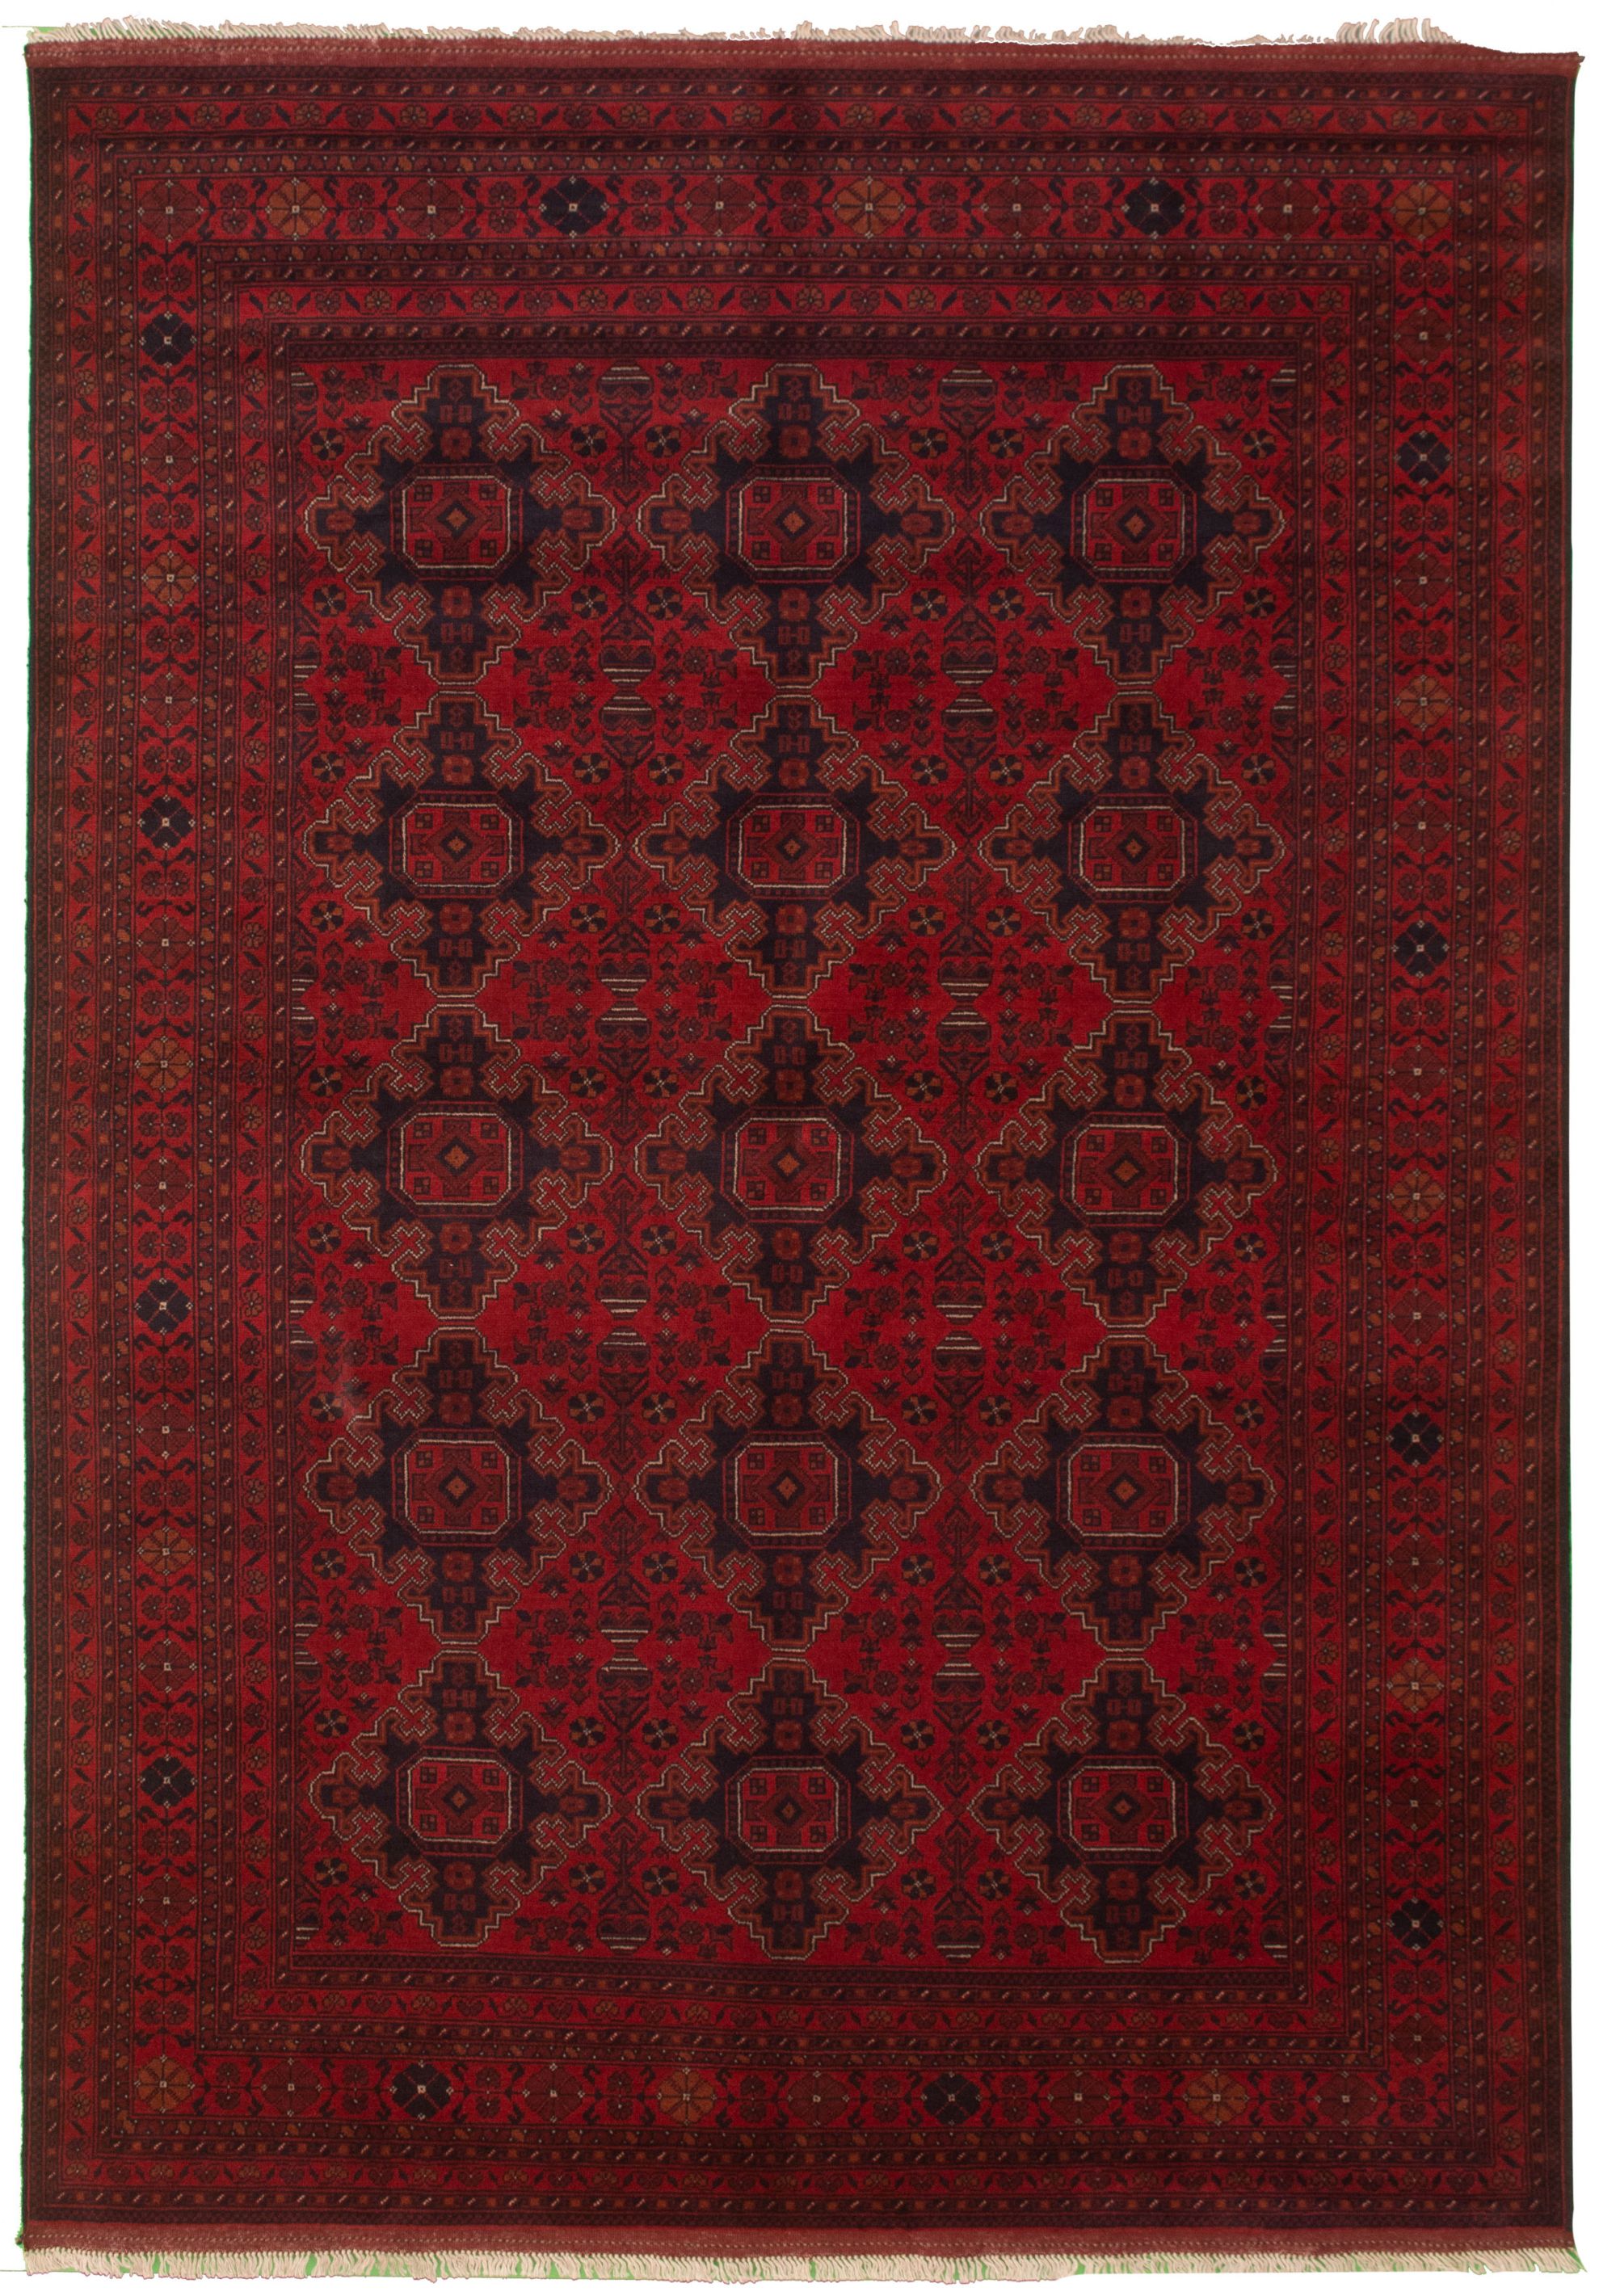 Hand-knotted Finest Khal Mohammadi Red Wool Rug 6'10" x 9'9"  Size: 6'10" x 9'9"  